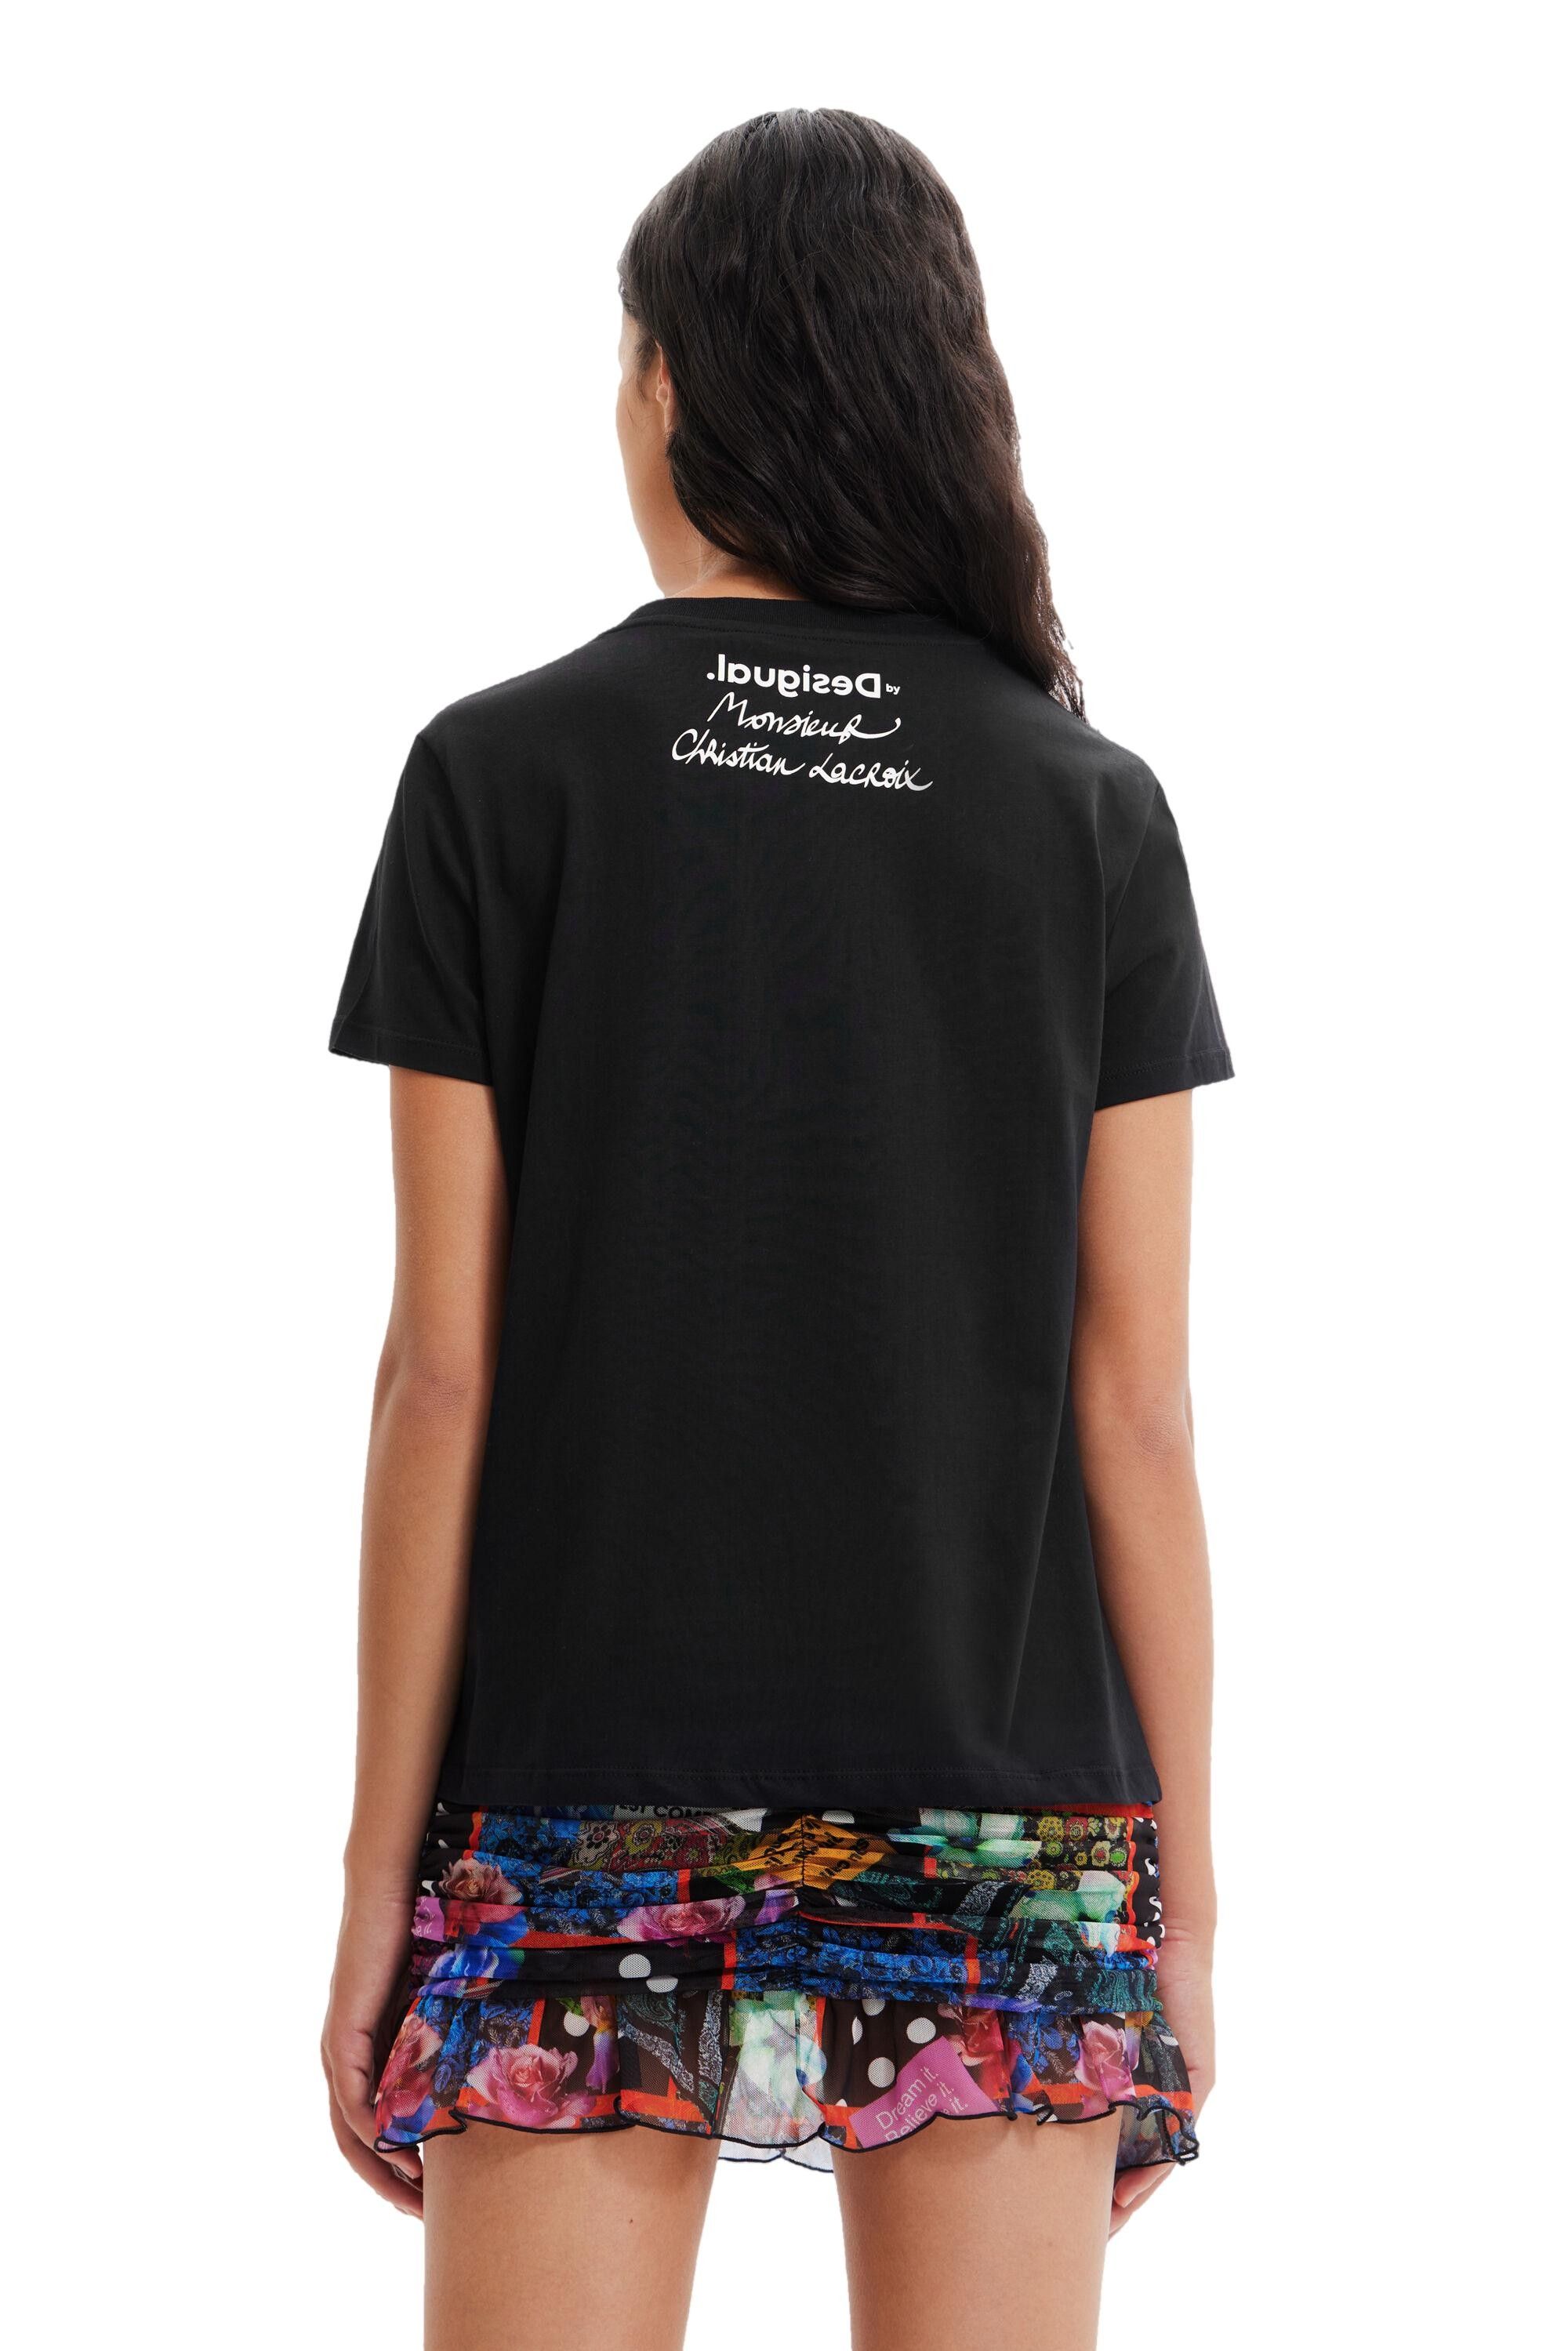 Brand: Desigual
Gender: Women
Type: T-shirts
Season: Fall/Winter

PRODUCT DETAIL
• Color: black
• Pattern: print
• Sleeves: short
• Neckline: round neck

COMPOSITION AND MATERIAL
• Composition: -100% cotton 
•  Washing: machine wash at 30°